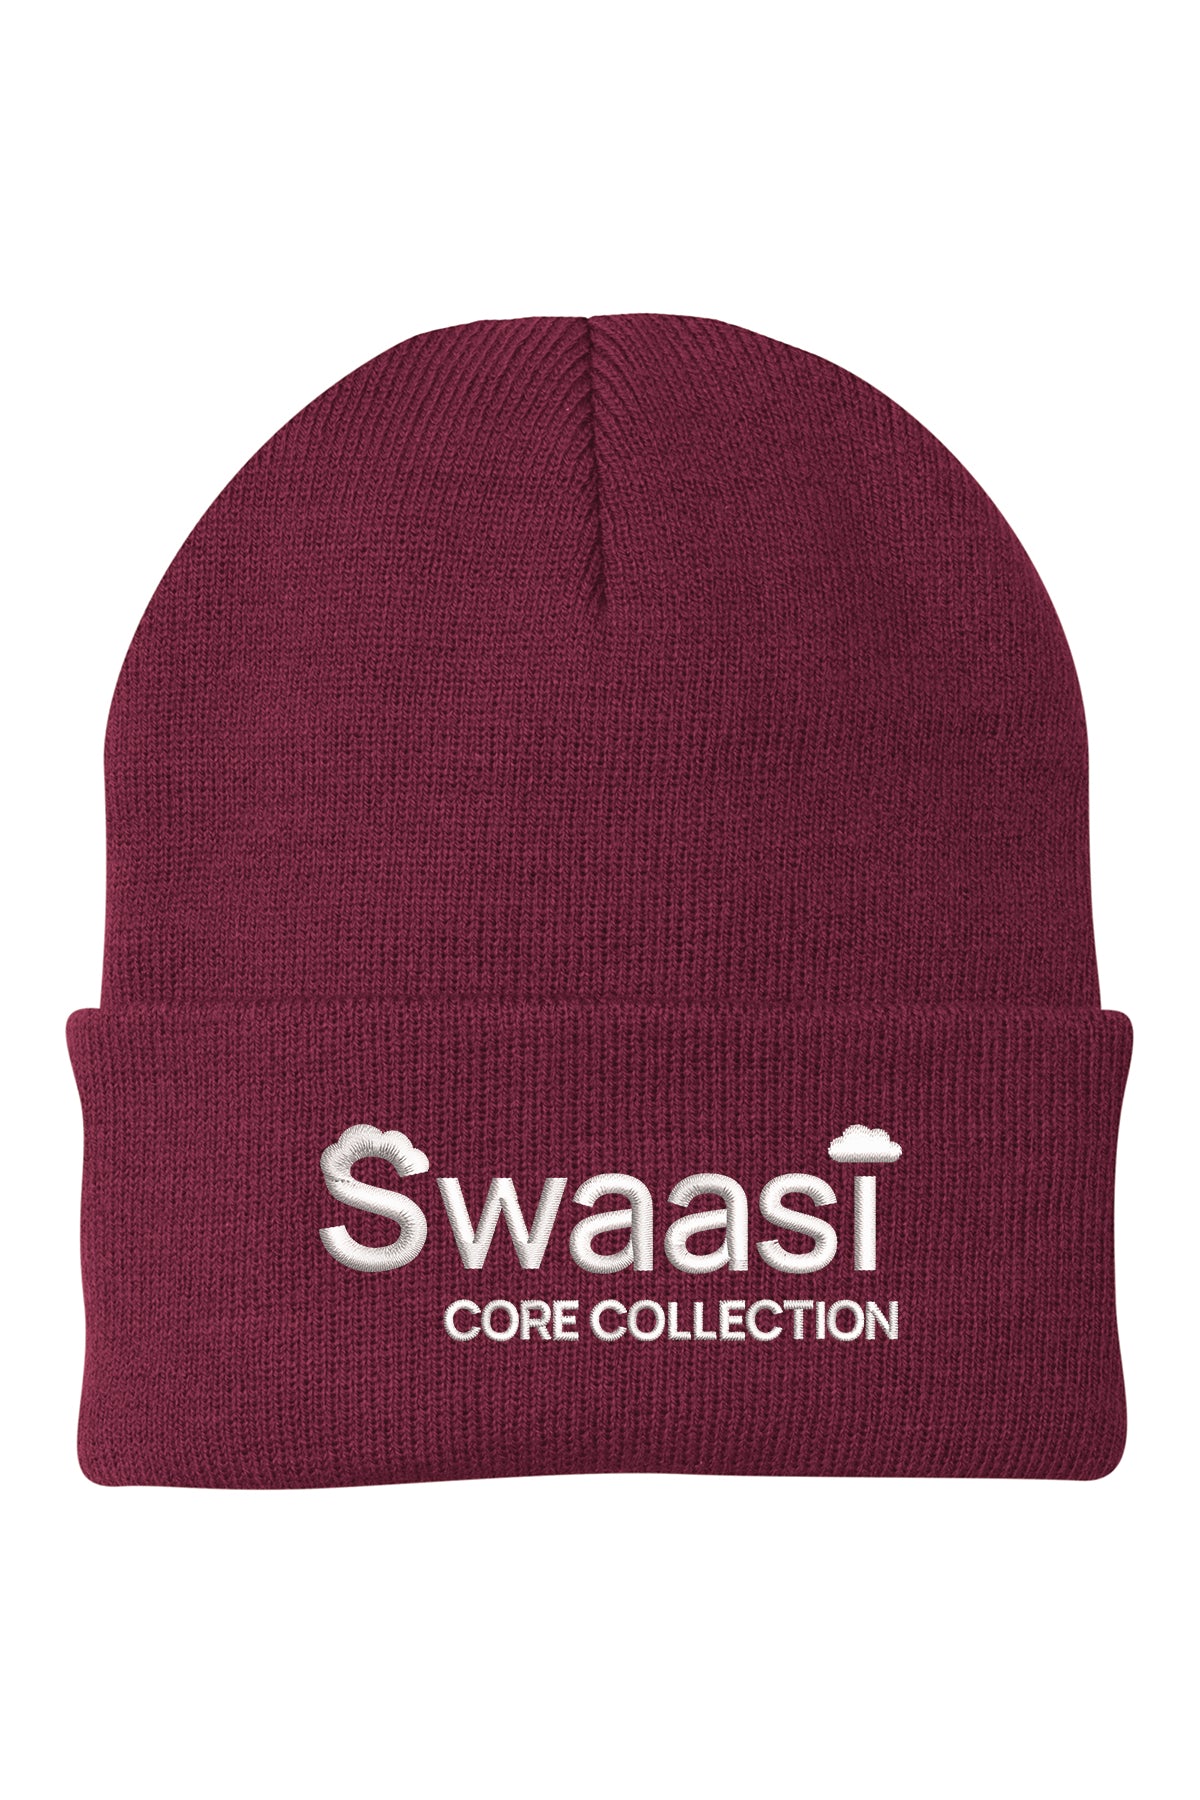 Swaasi Core - P&C® Knit Cap with Embroidery Logo